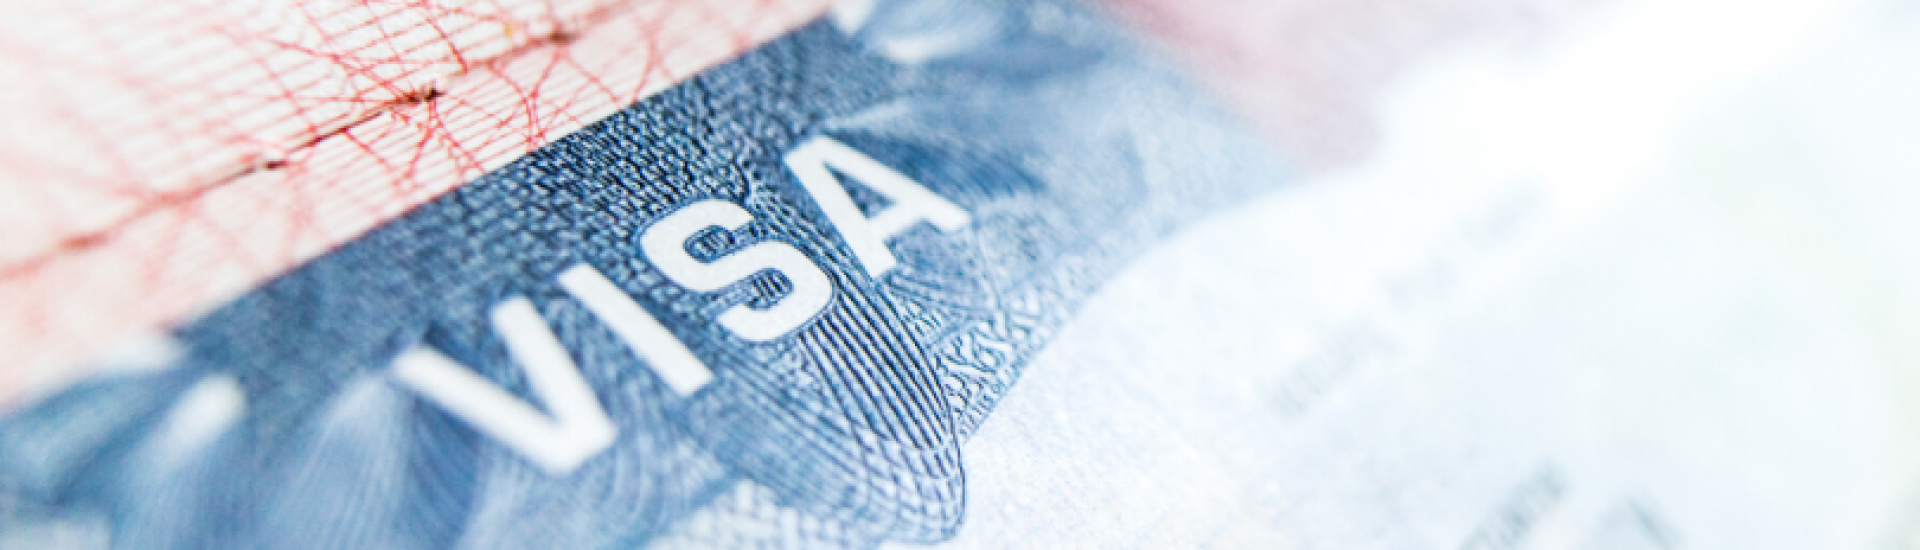 Holders of an investment visa 
receive a residence permit in 
Uzbekistan